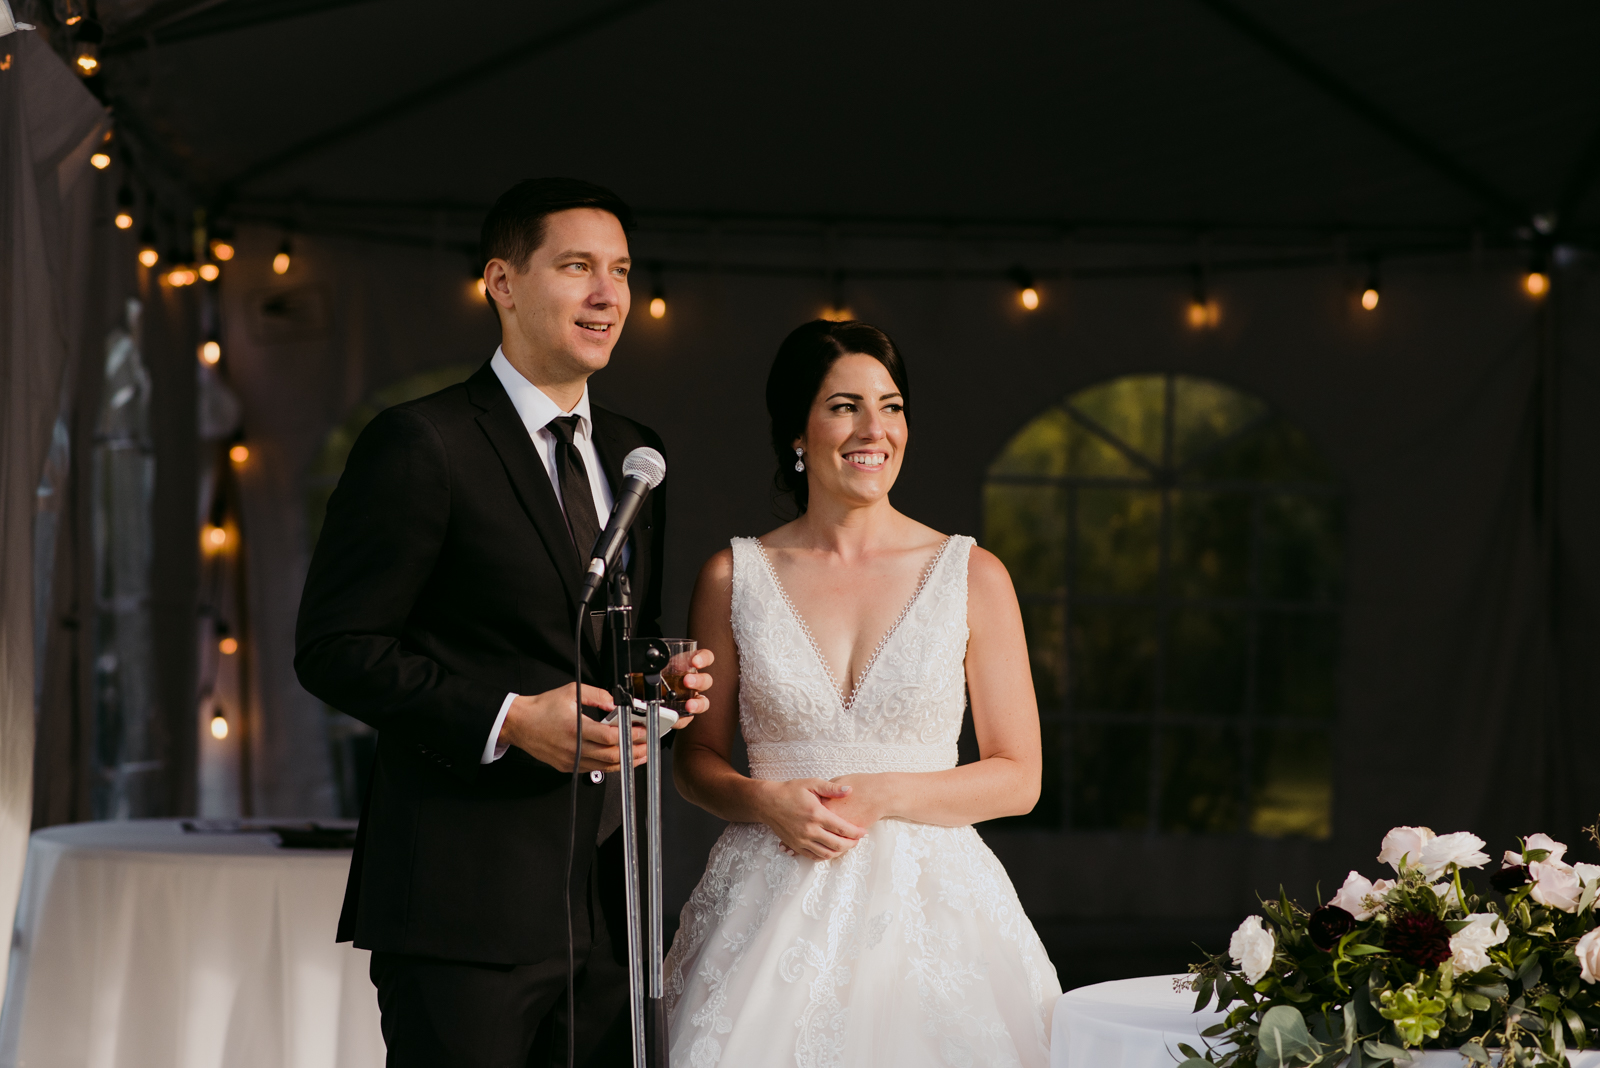 bride and groom giving speech during outdoor wedding reception